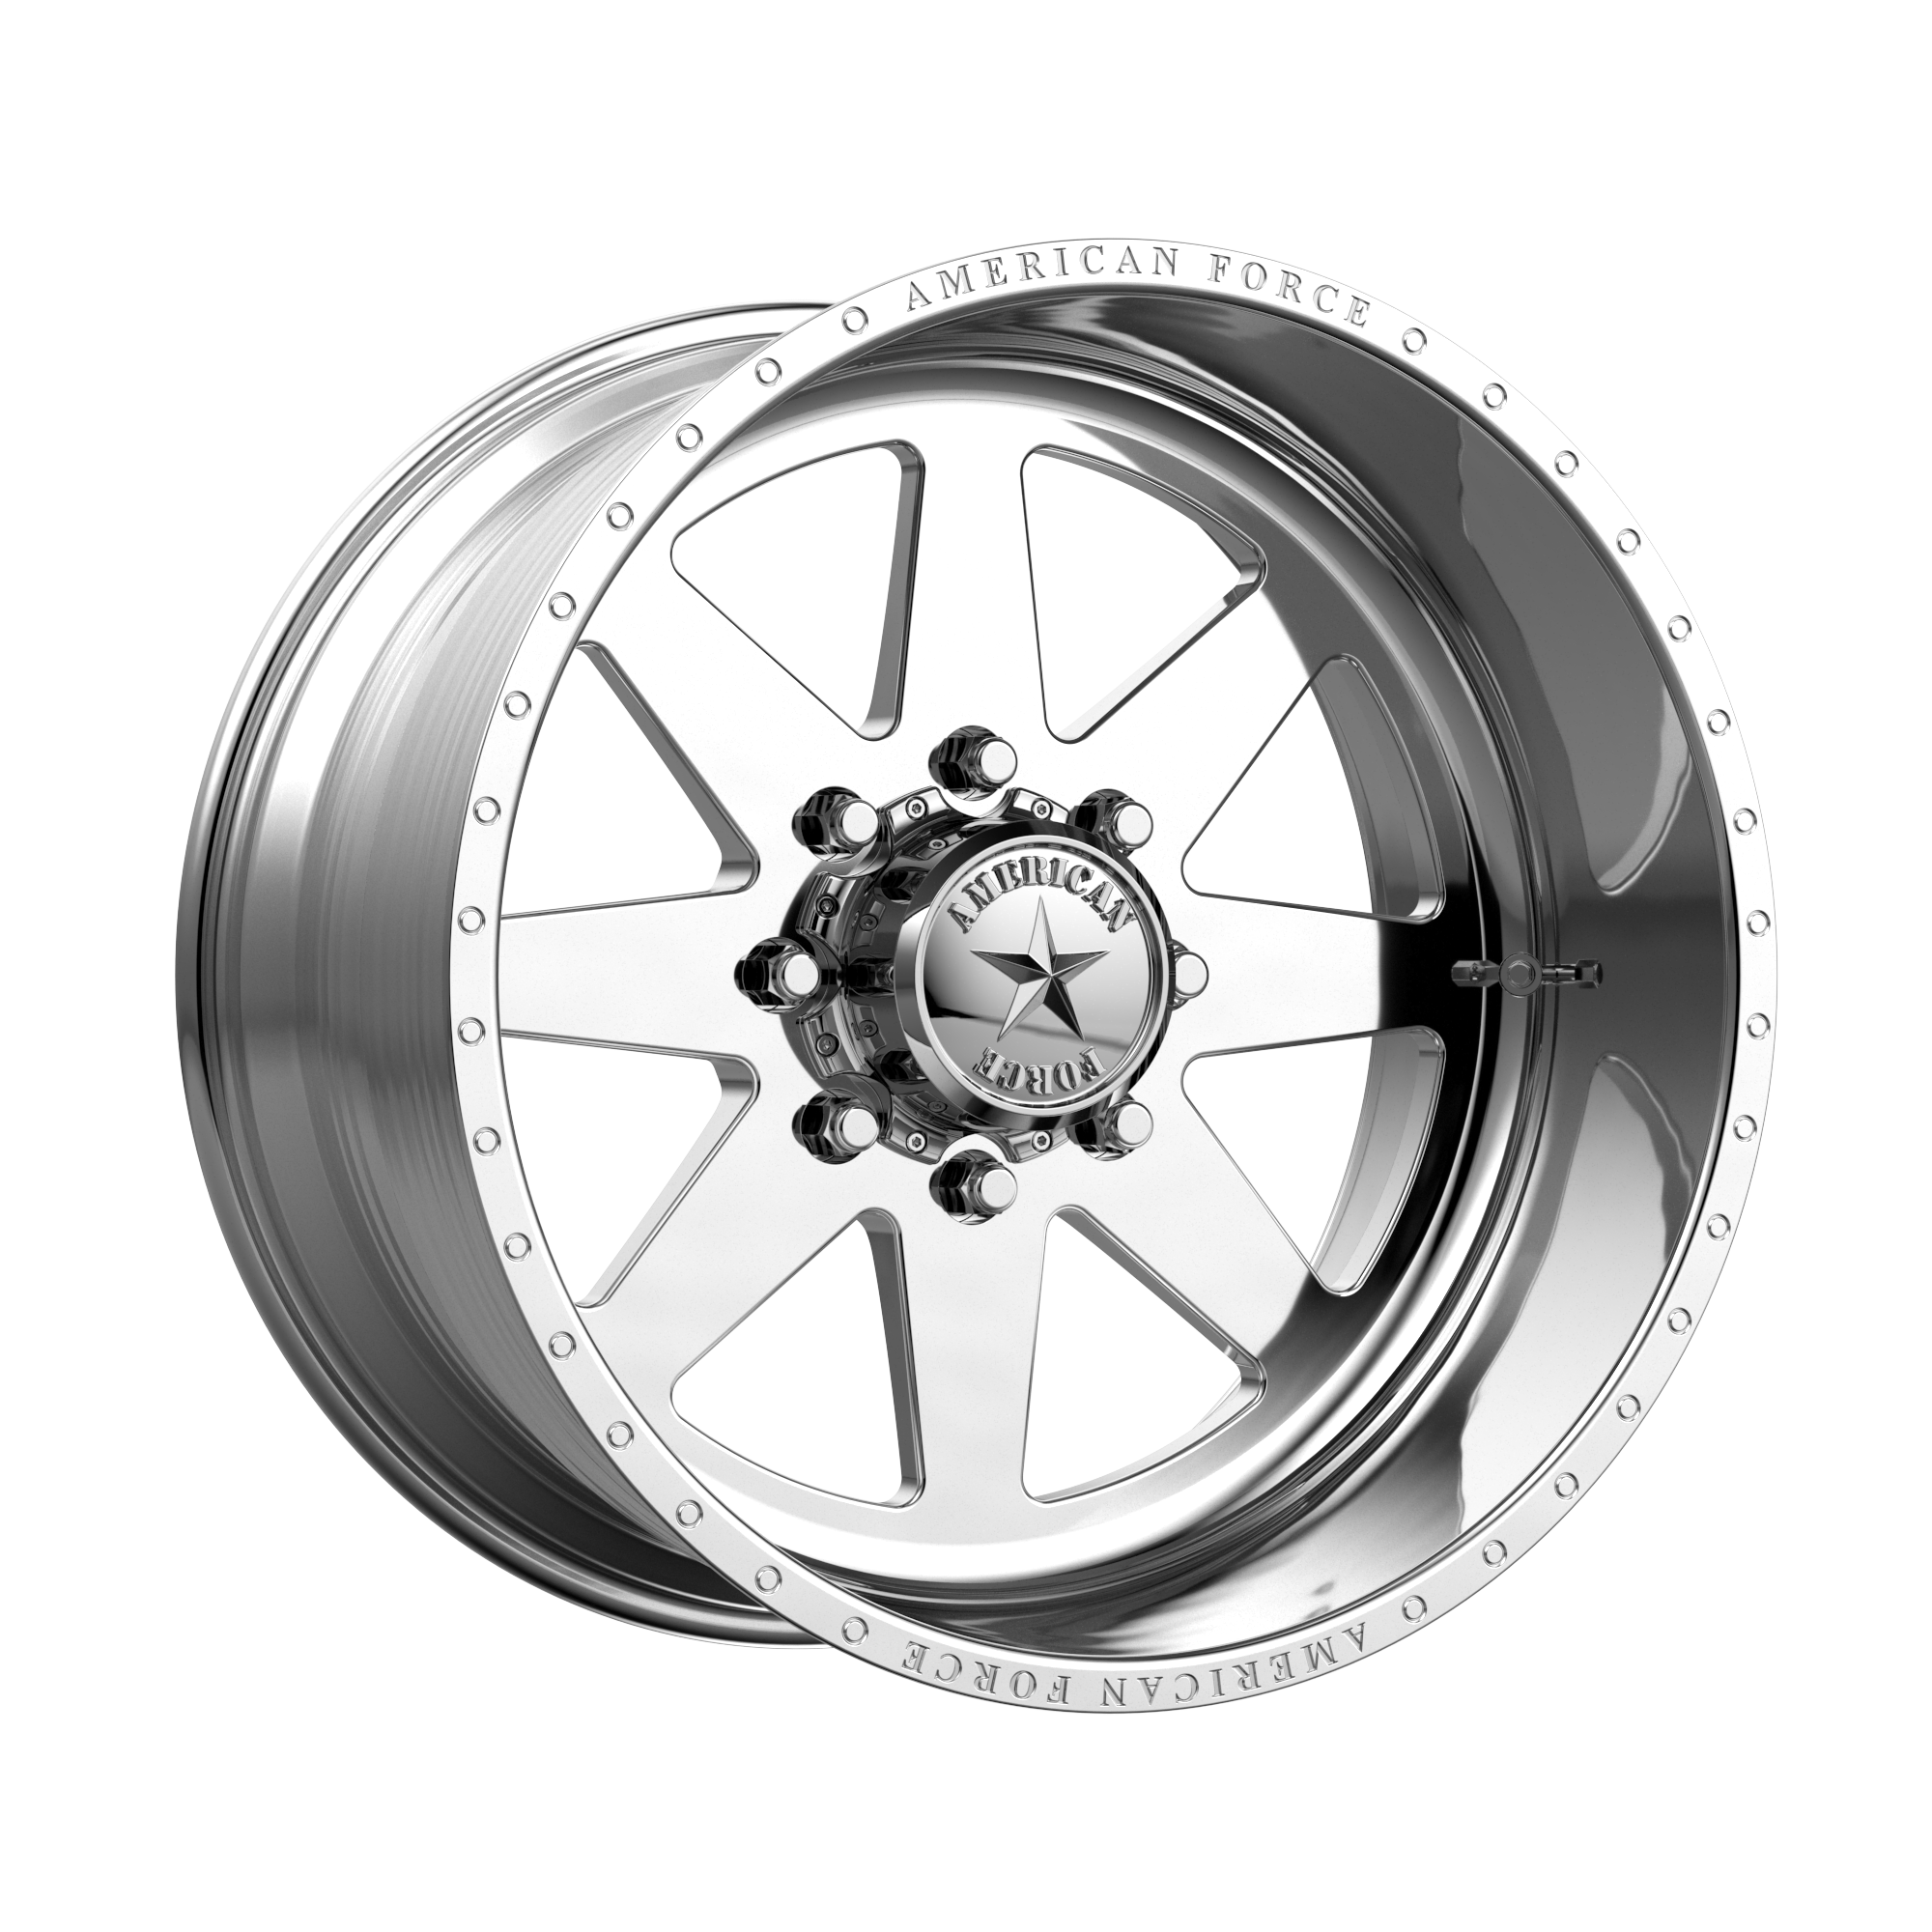 INDEPENDENCE SS 22x16 6x135.00 POLISHED (-73 mm) - Tires and Engine Performance